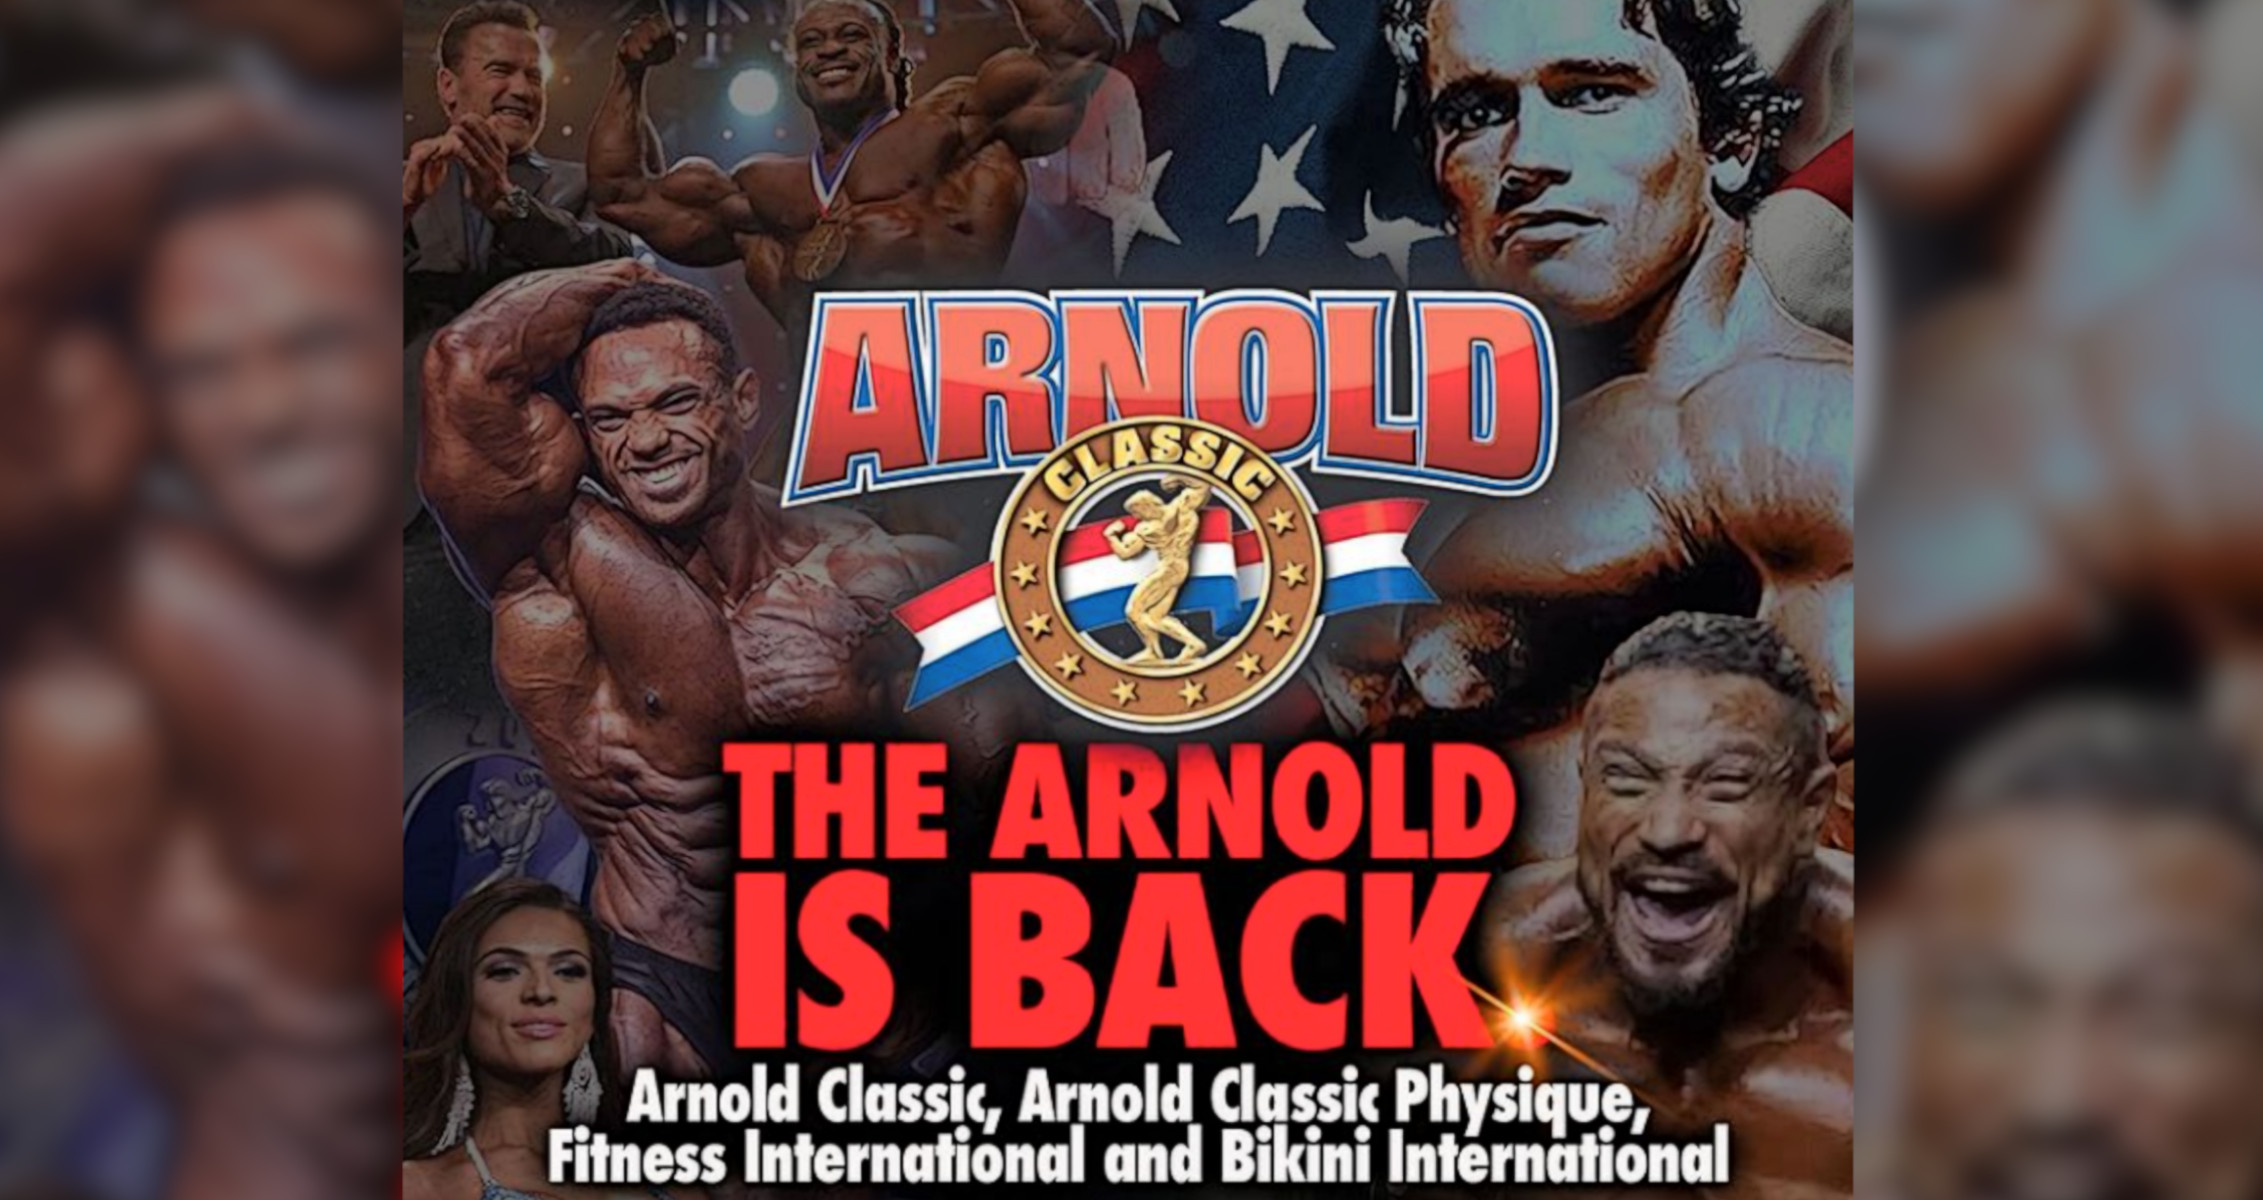 The-Arnold-Classic-Has-Officially-Been-Set-to-Take-Place-in-Ohio-on-September-25.jpg